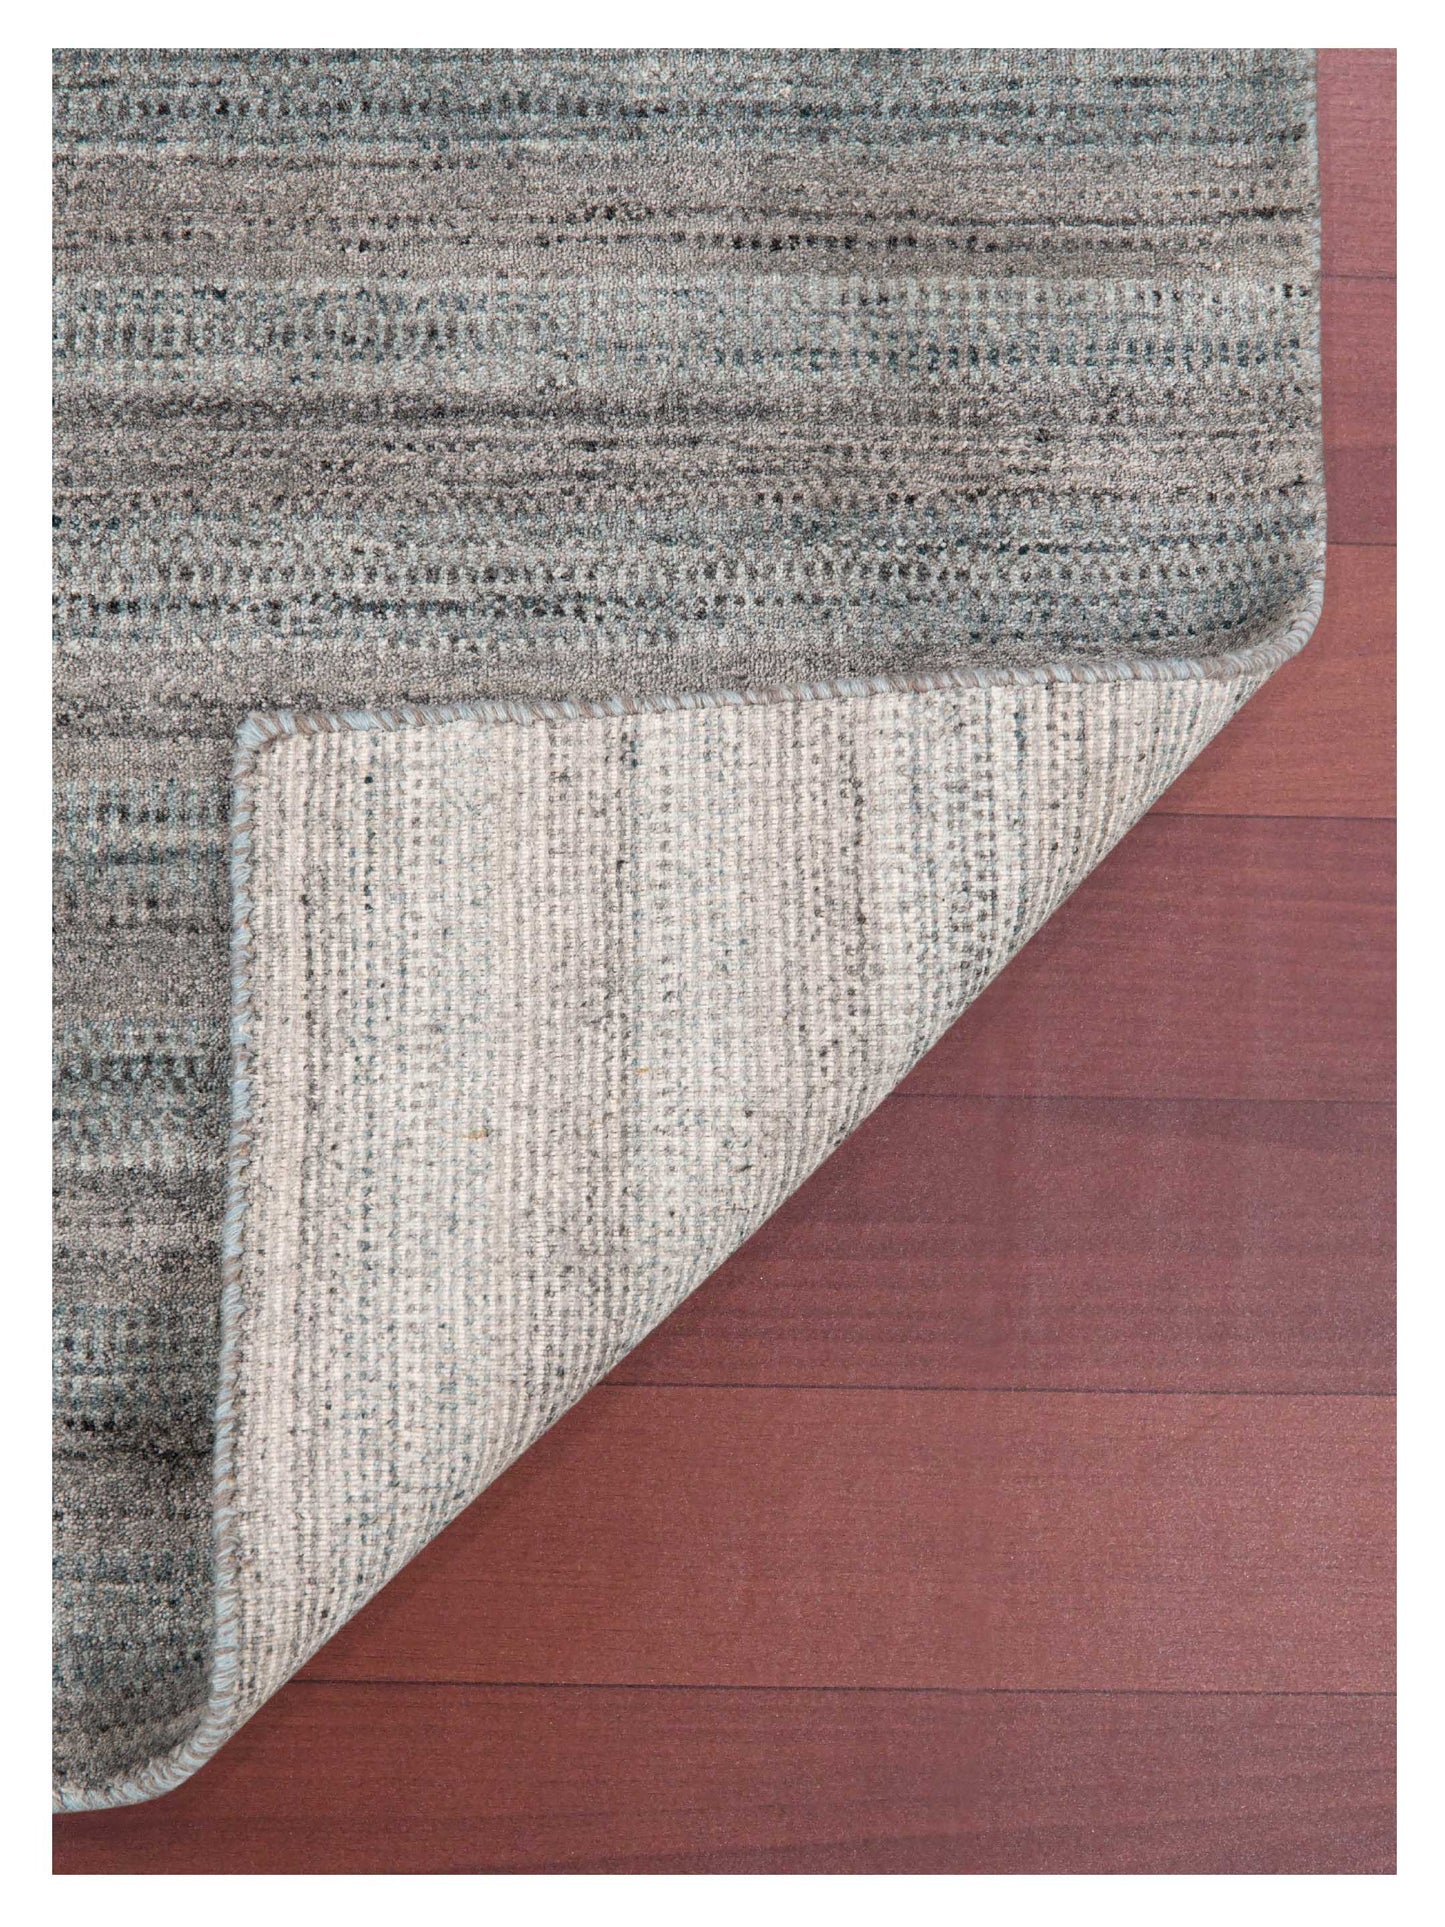 Limited REDCLIFFE RD-807 GRAYISH BLUE  Transitional Woven Rug